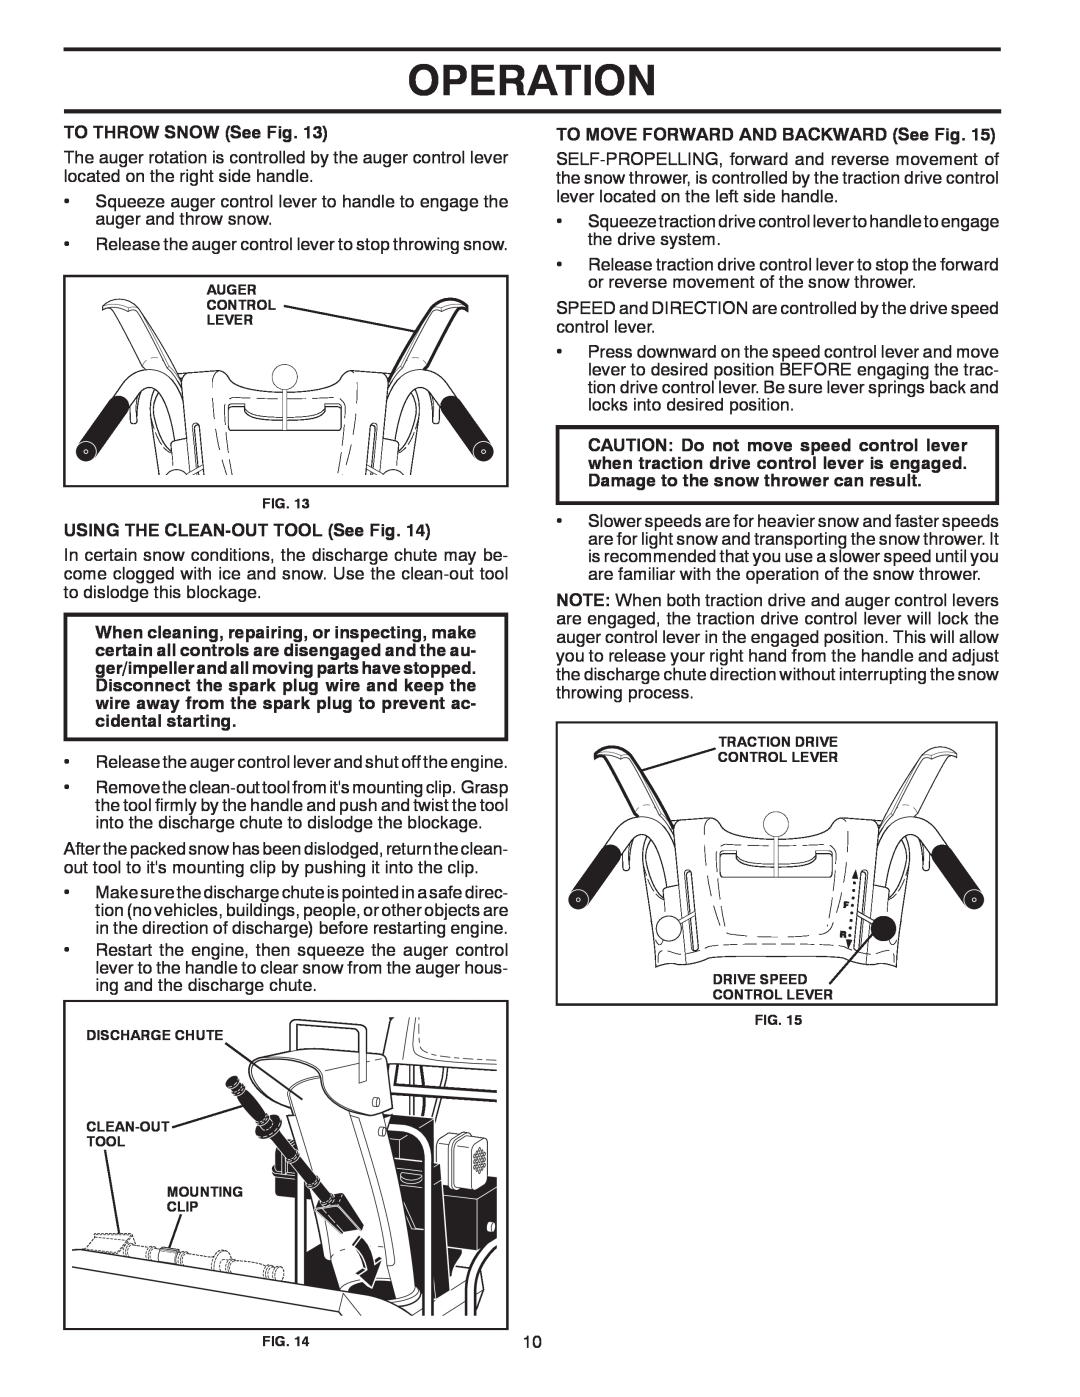 McCulloch MC12527ES owner manual Operation, TO THROW SNOW See Fig, USING THE CLEAN-OUTTOOL See Fig 